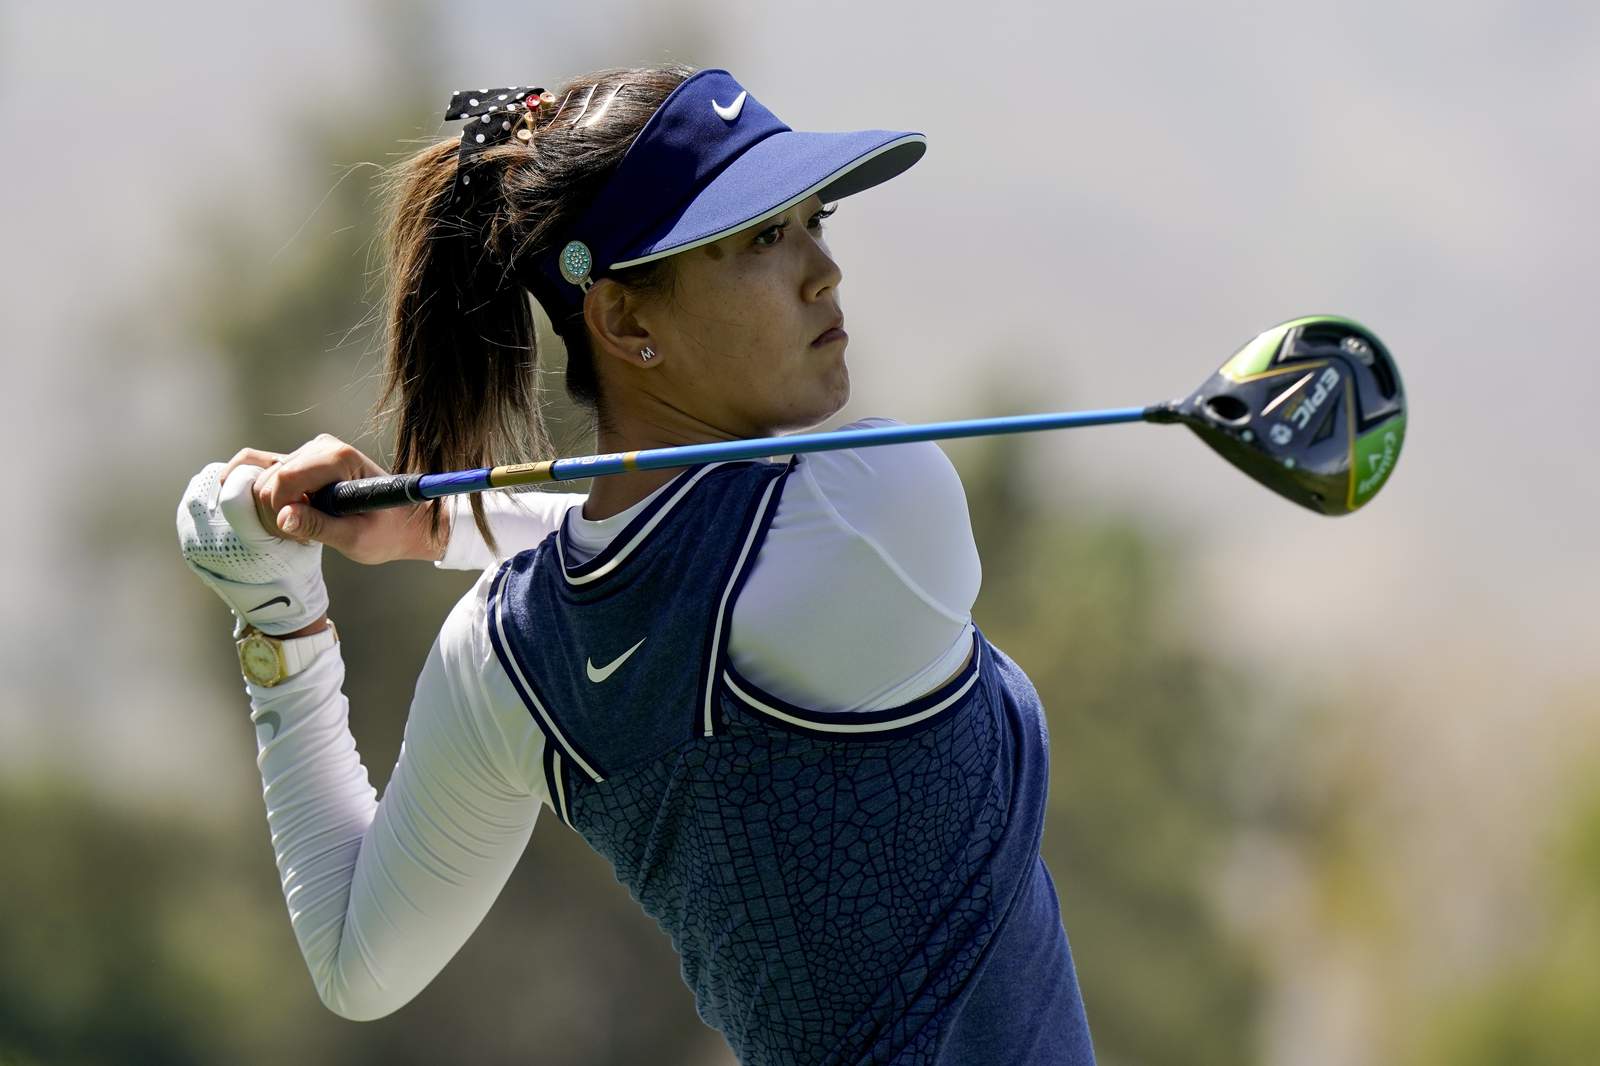 Michelle Wie West gives birth to a daughter